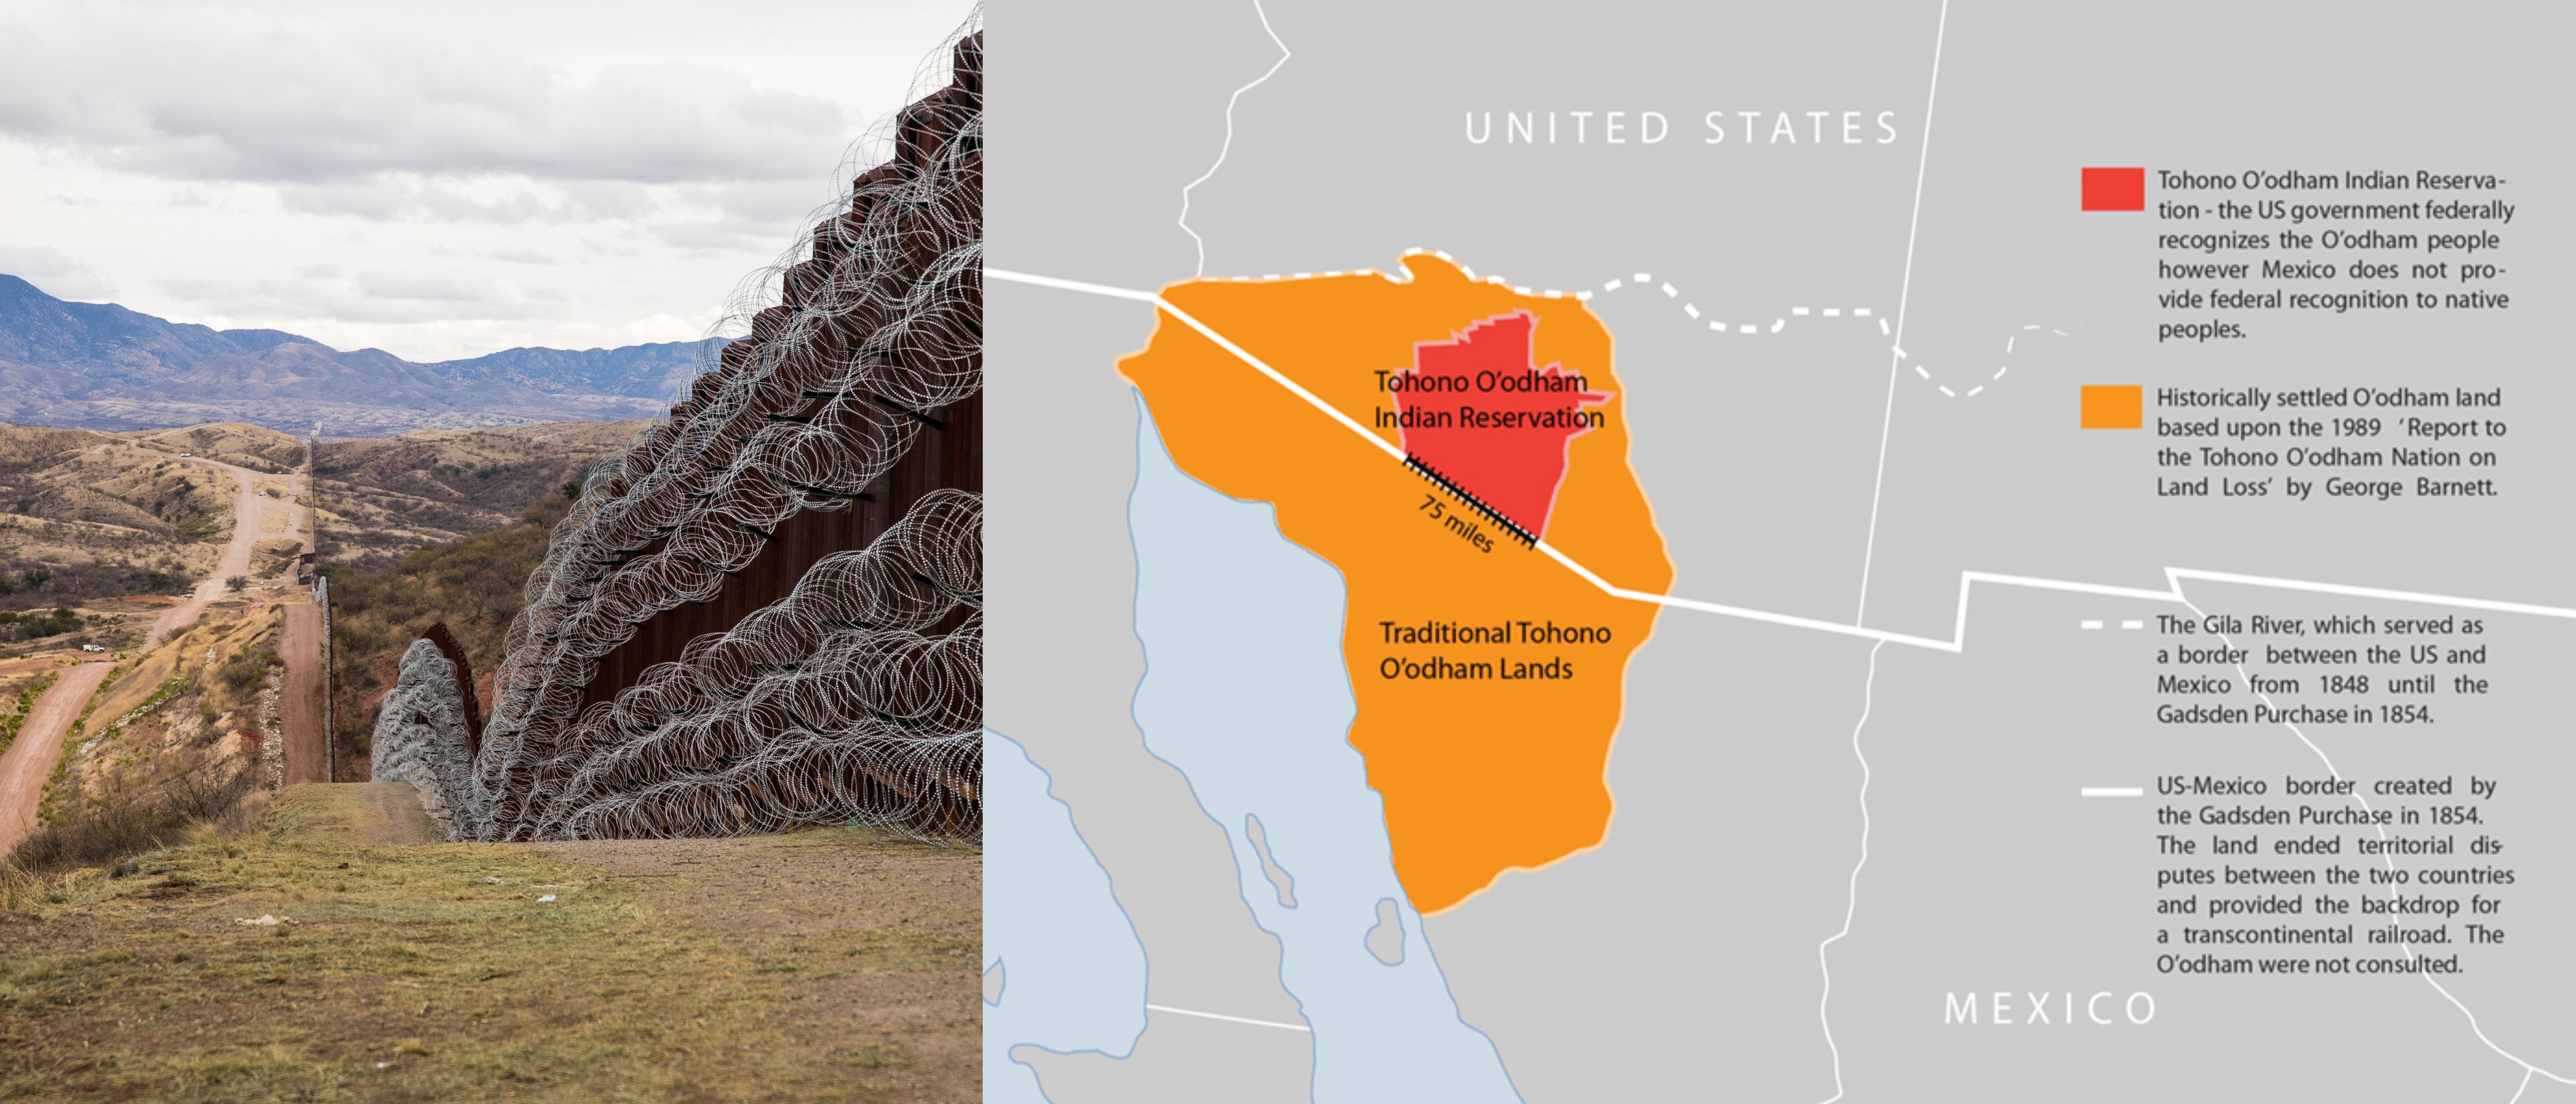 Fence in mountainous area with barbed-wire coils and map showing Tohono O'odham lands bisected by the border